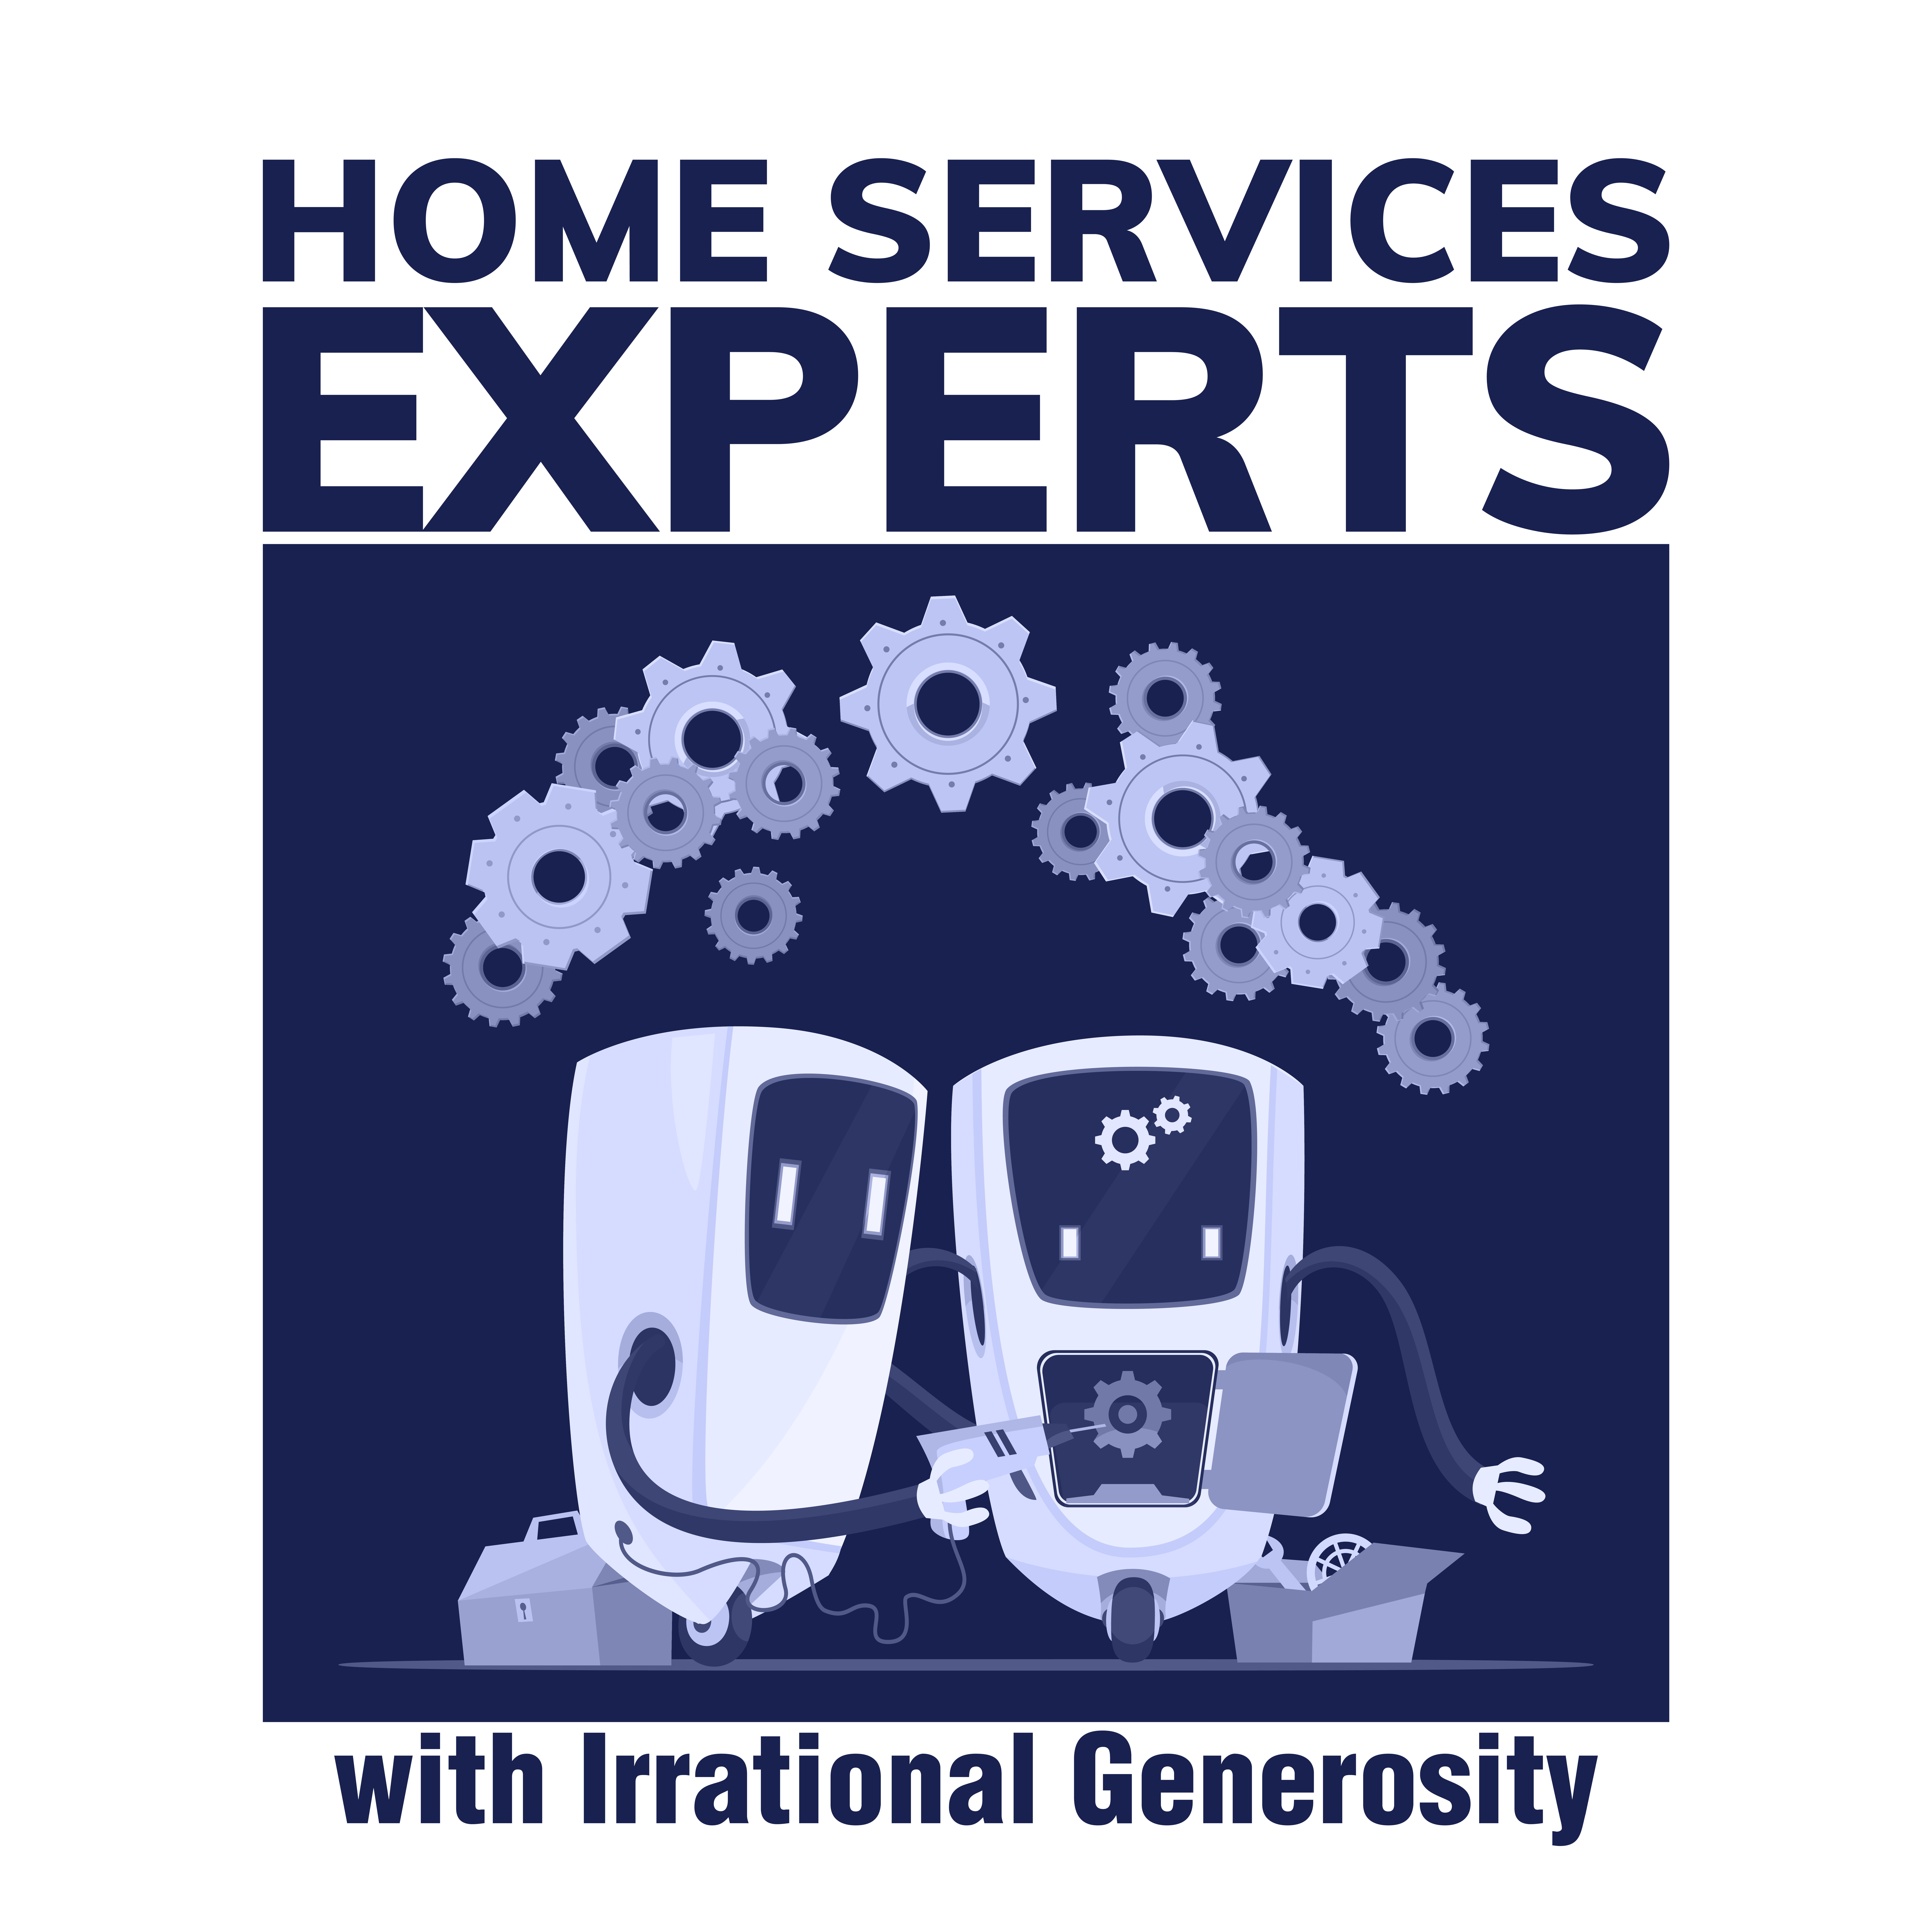 Home Services Experts with Irrational Generosity PA 02